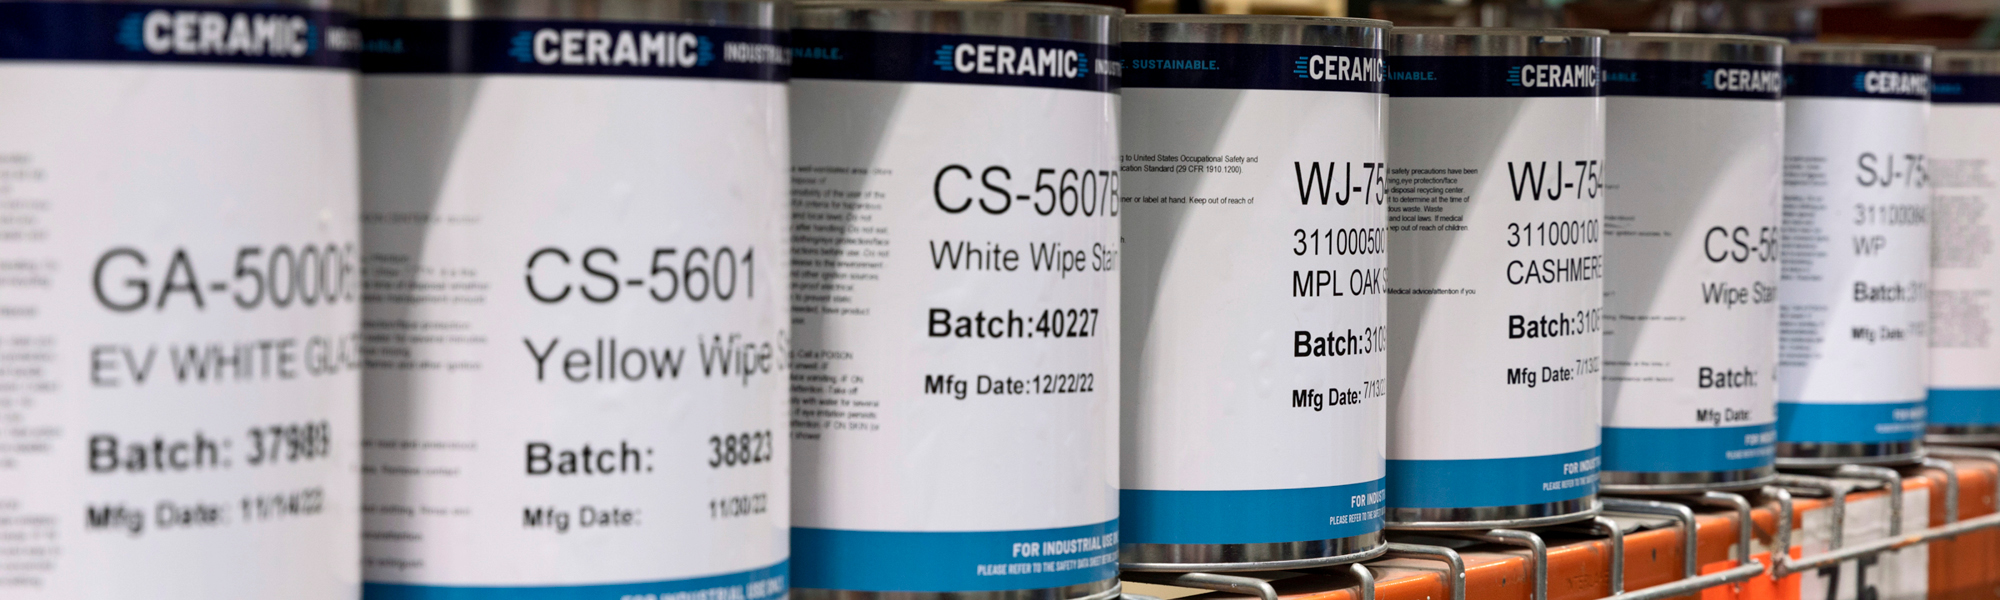 Safety Data - Ceramic Industrial Coatings